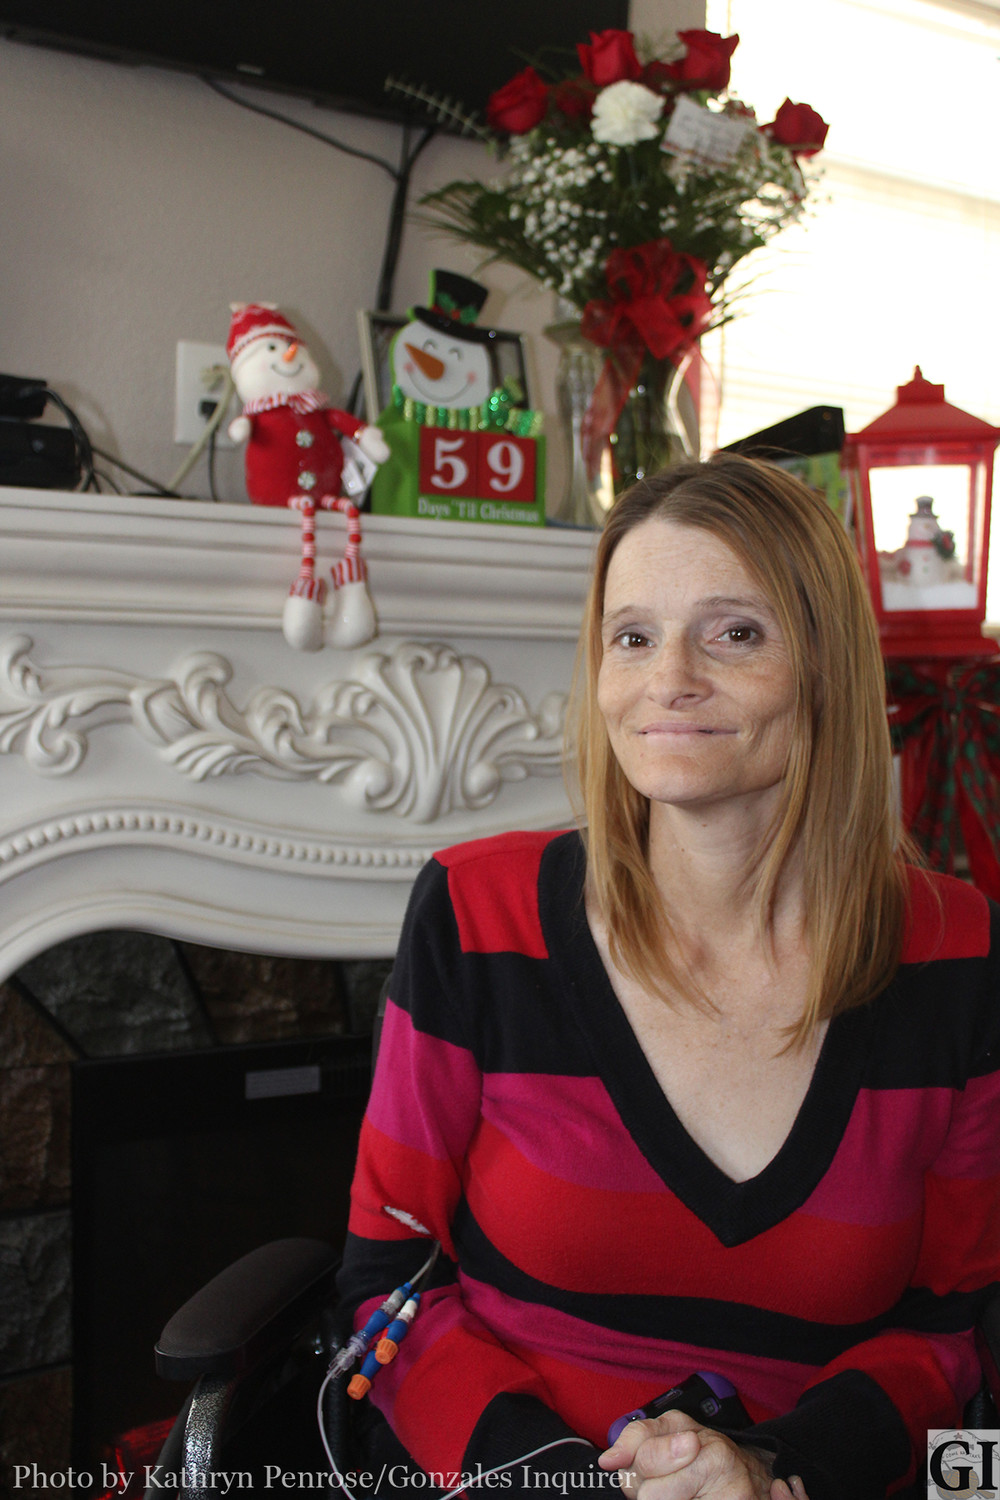 On Friday afternoon, when the cold front started moving in, Becky Cole was home by her fireplace counting down the days until Christmas. Cole's family decorated her house early this year, to stretch out the joy of this coming holiday season by declaring Christmas In October.